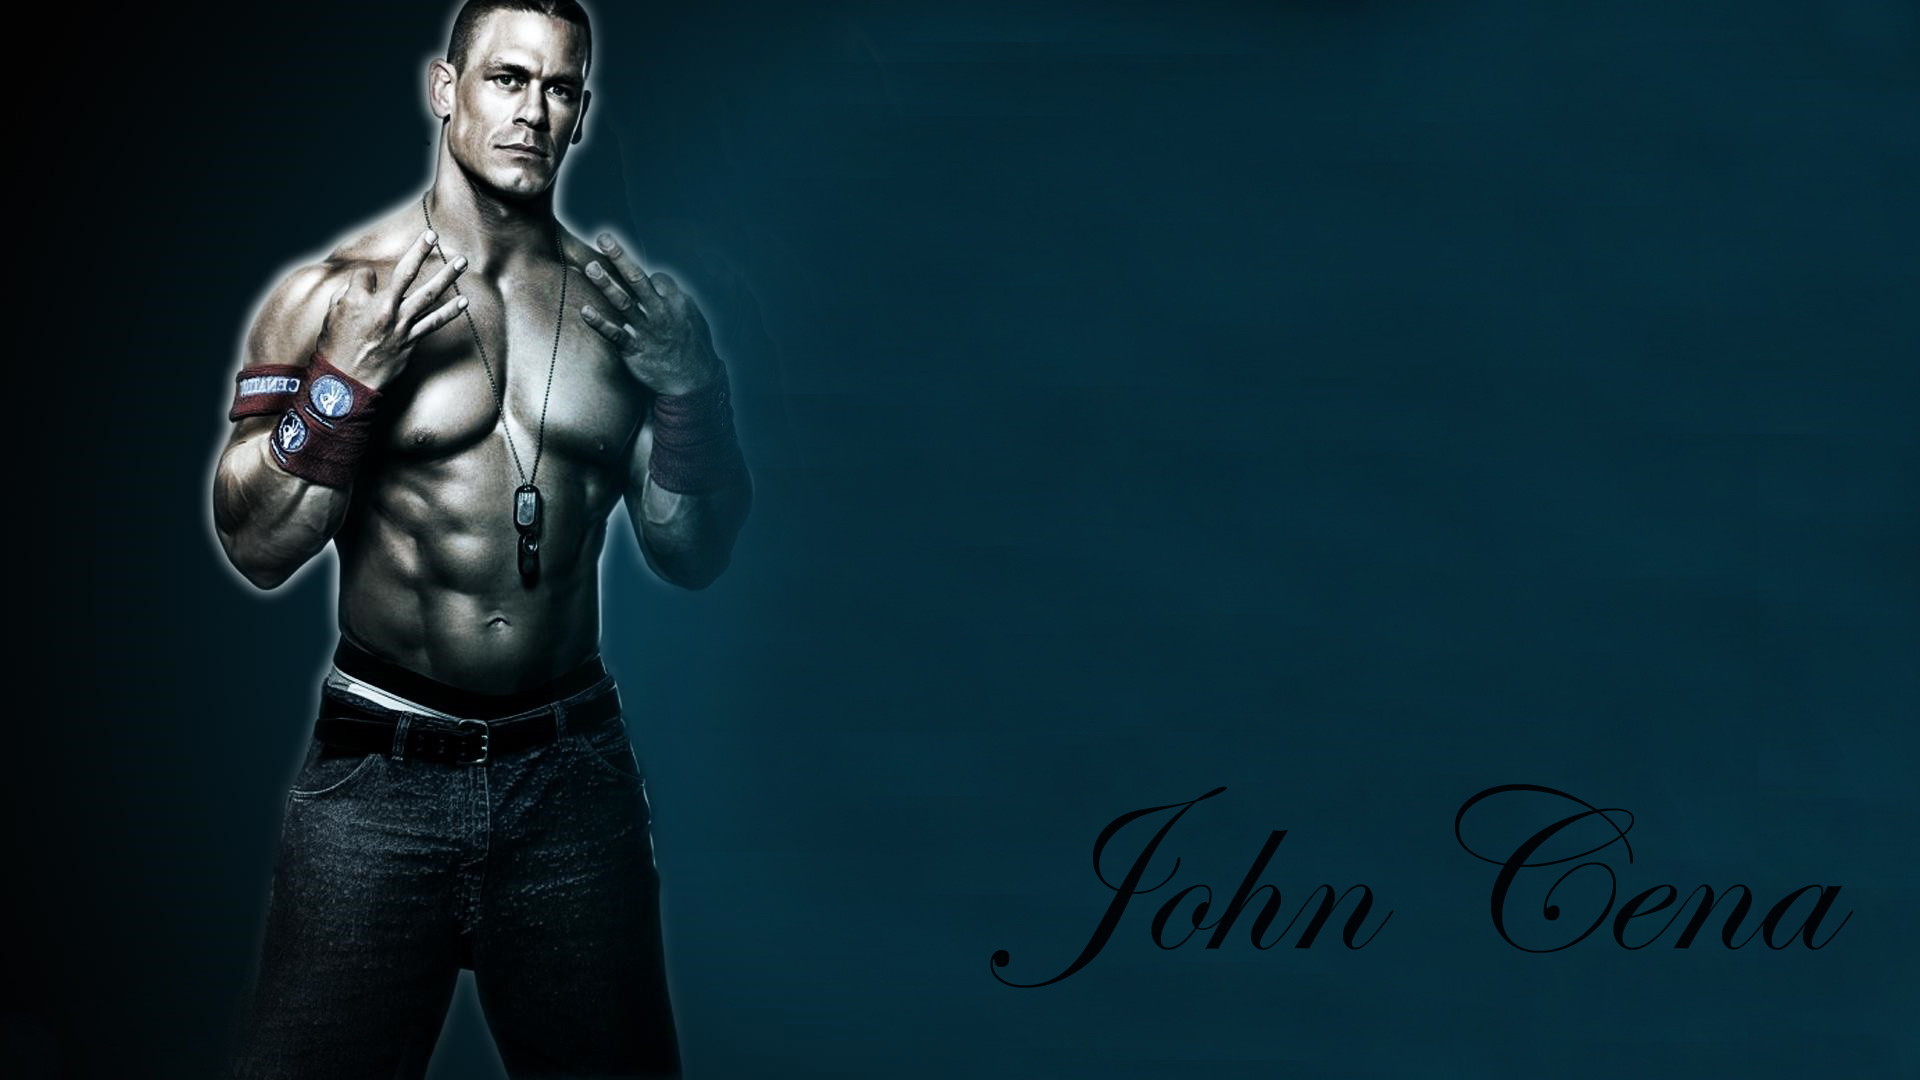 1920x1080 undefined John Cena Hd Images Wallpapers (65 Wallpapers .